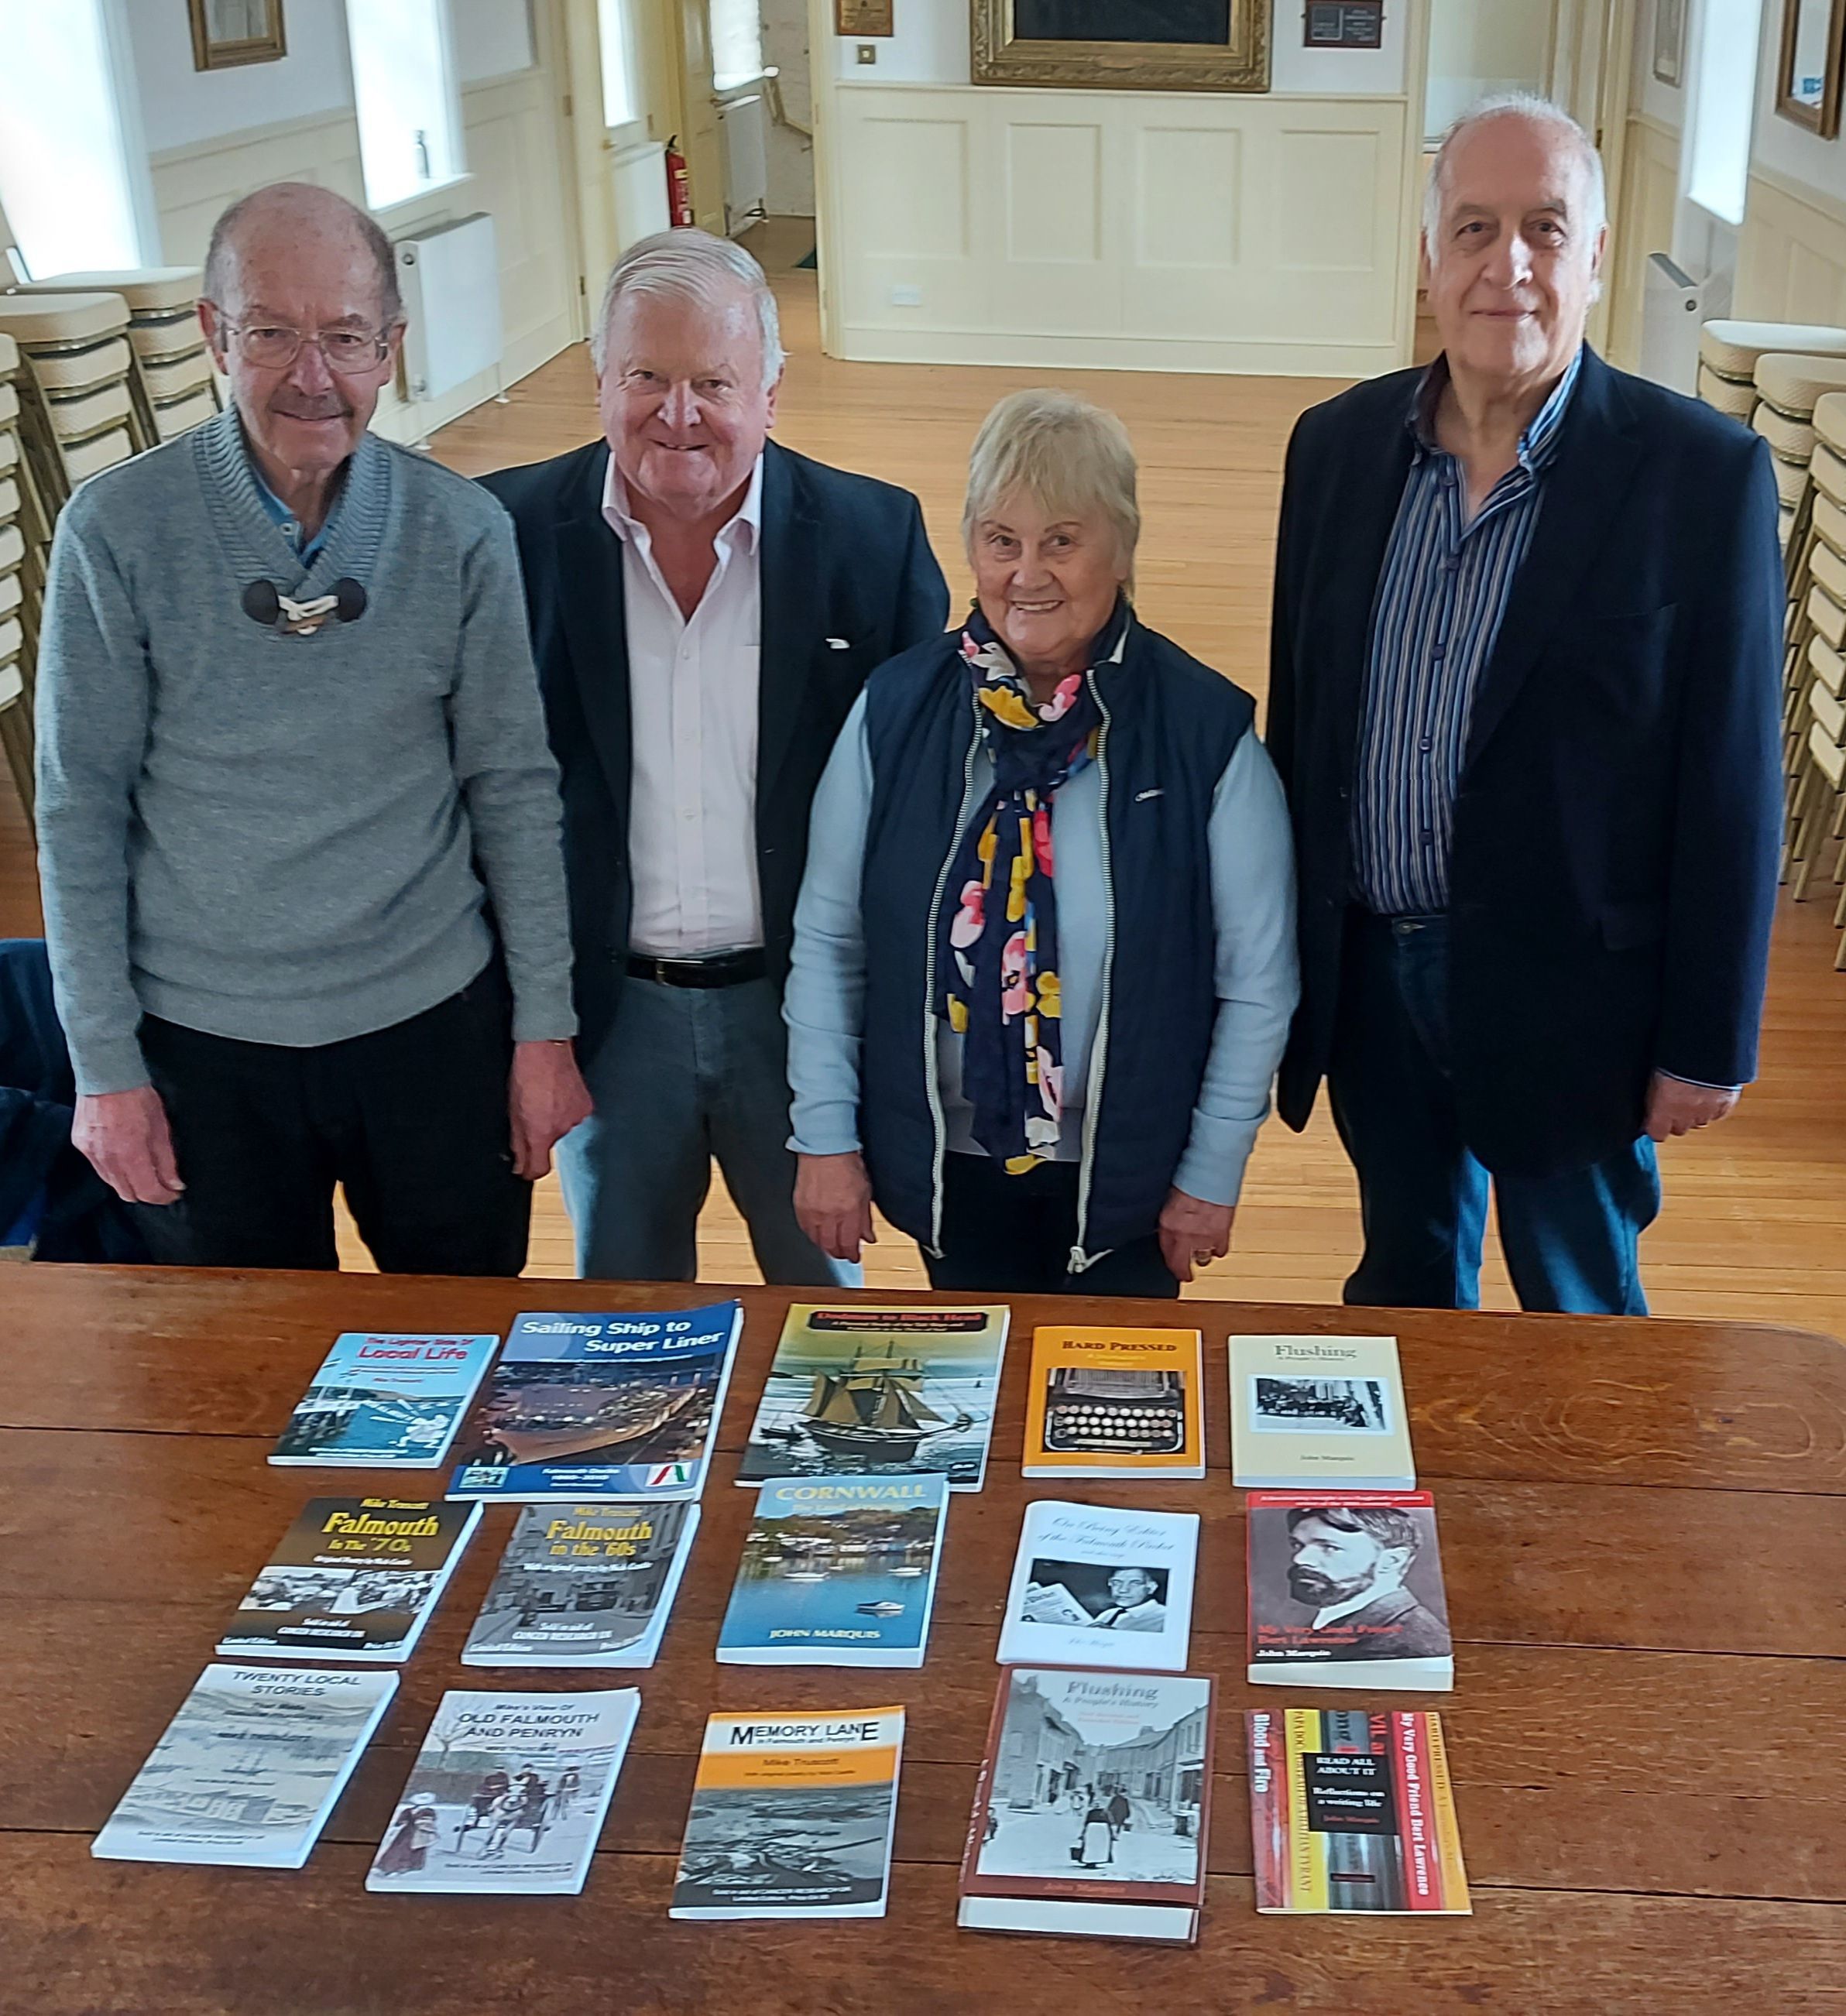 Mike Truscott, David Barnicoat, Gill Grant and John Marquis with the donated books